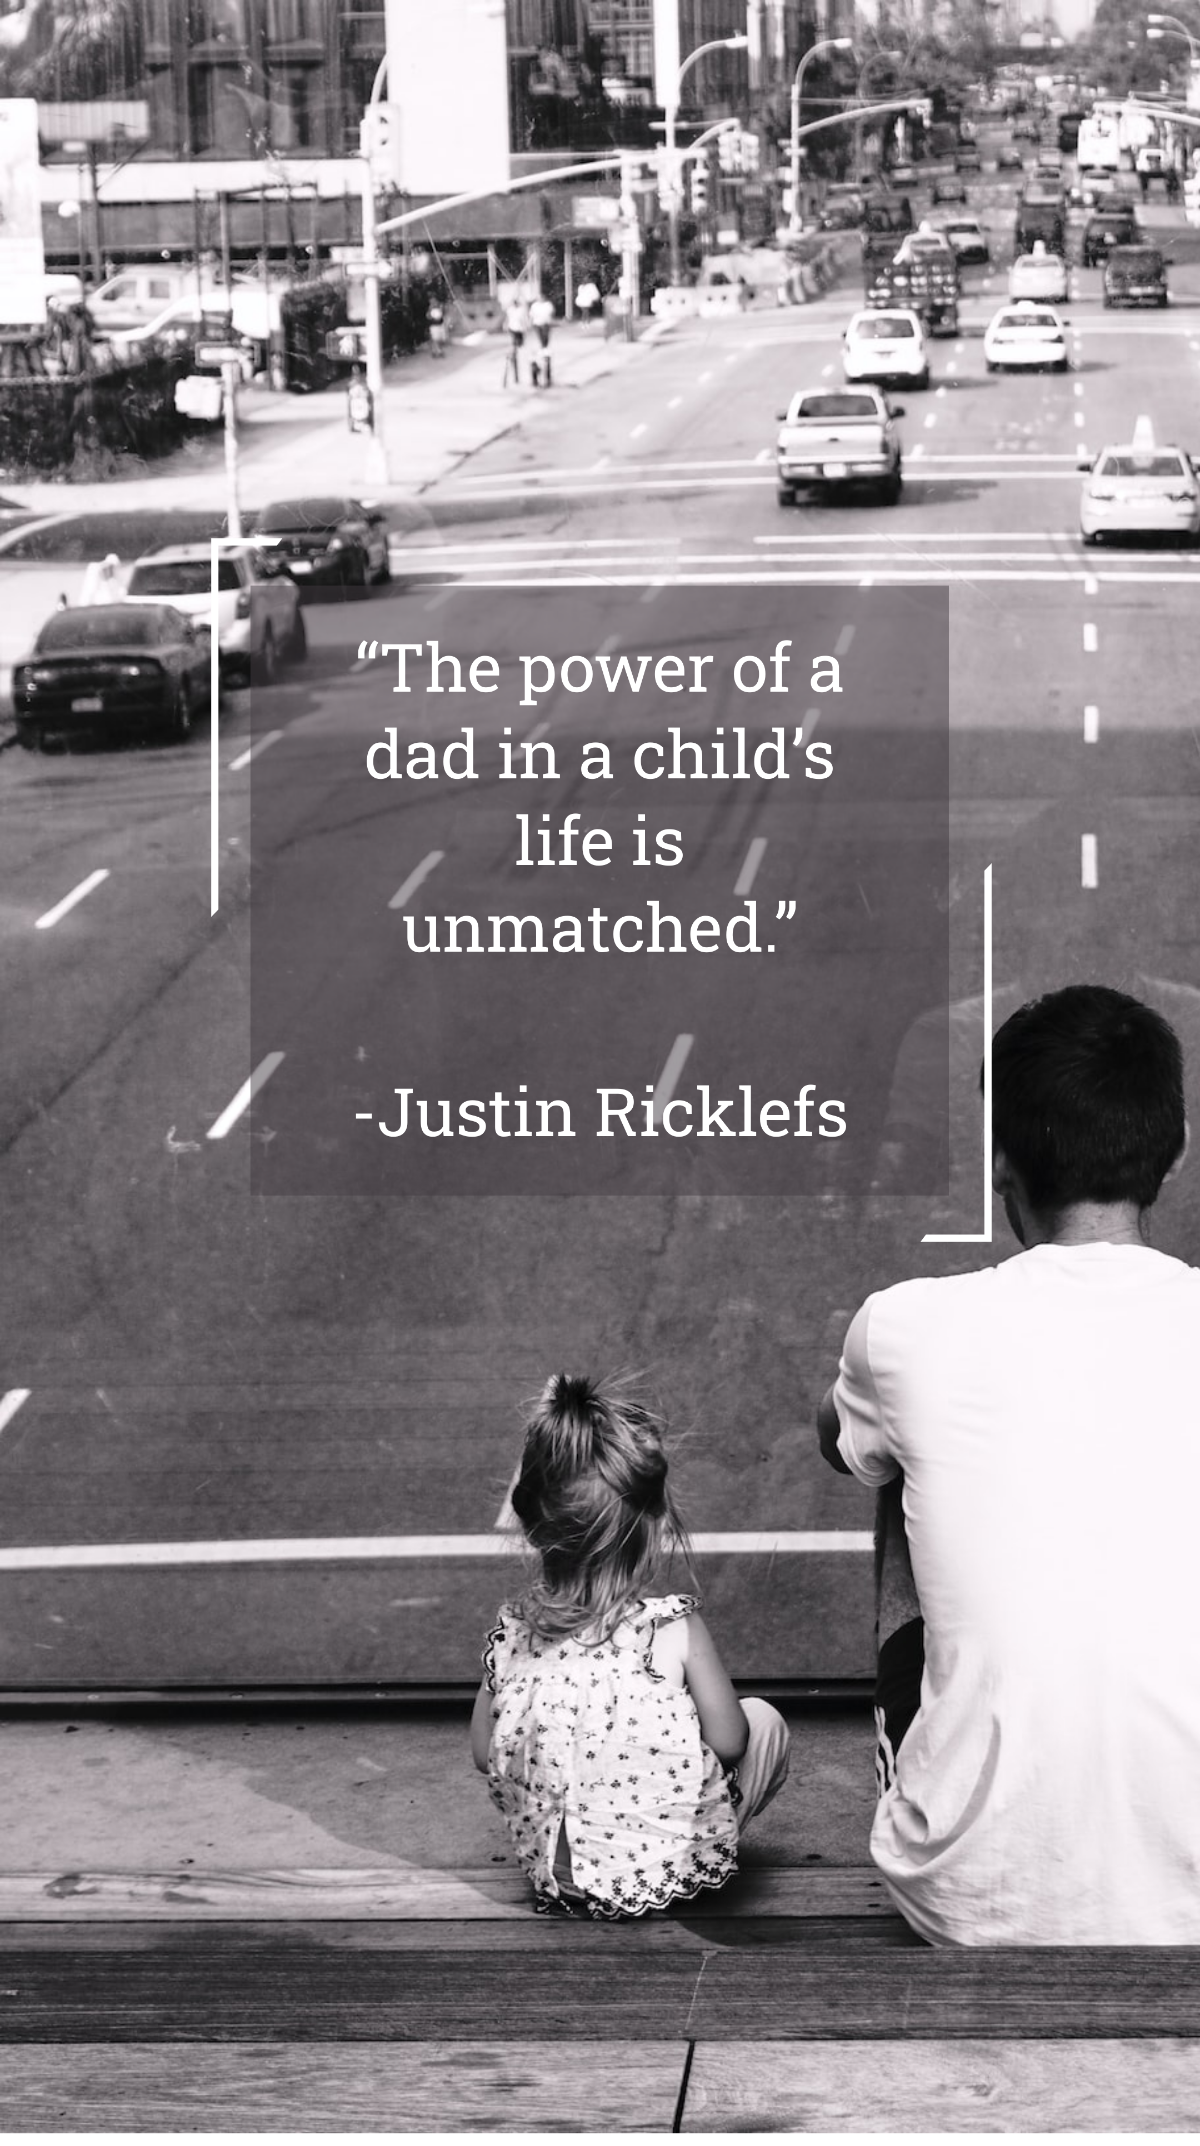 Justin Ricklefs - “The power of a dad in a child’s life is unmatched.” Template